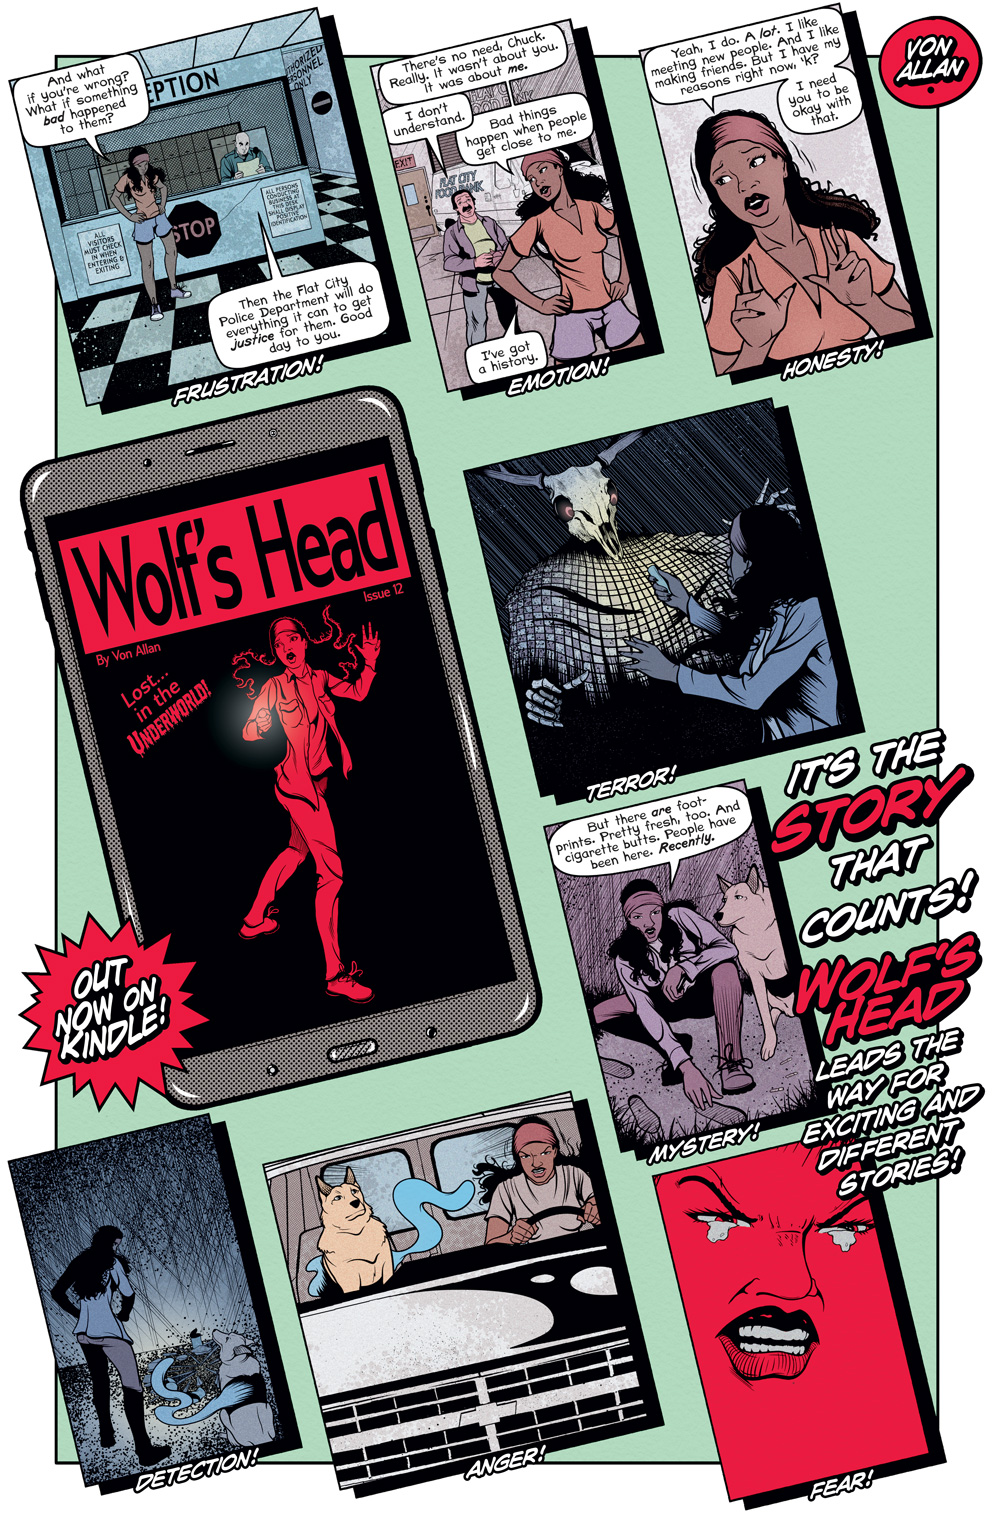 Teaser image for Wolf's Head issue 12 on Kindle